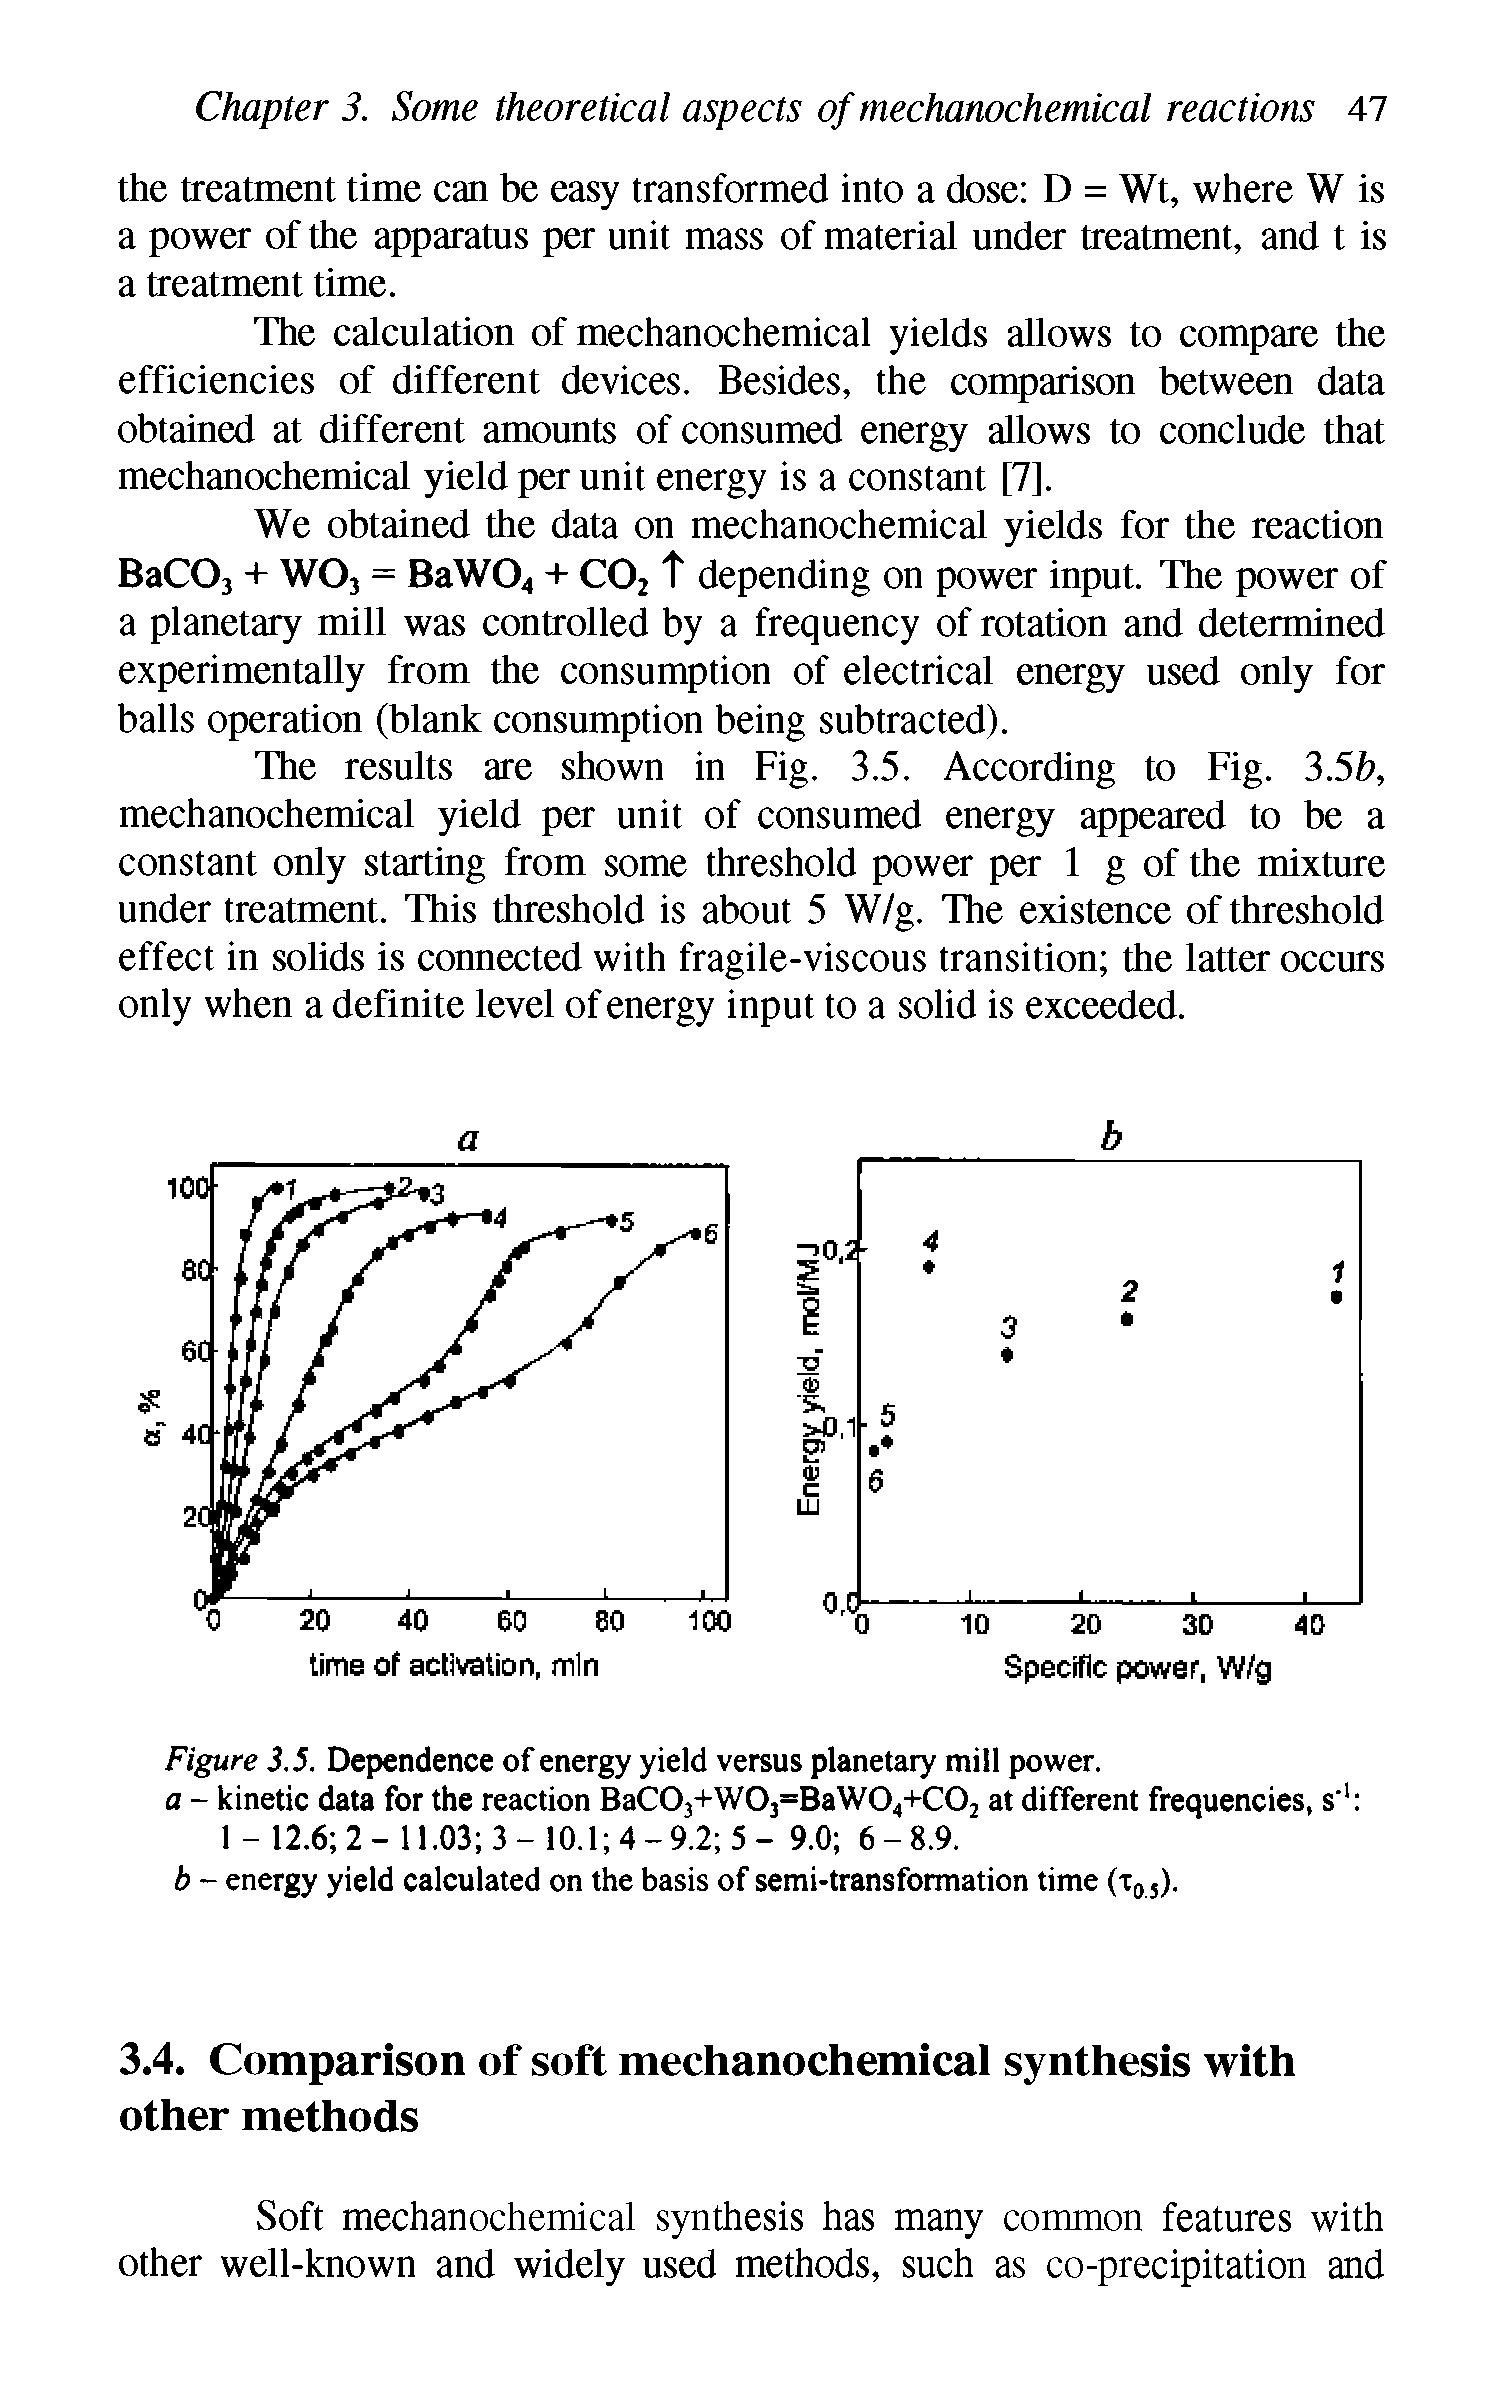 Figure 3.5. Dependence of energy yield versus planetary mill power. a - kinetic data for the reaction BaC0j+W03=BaW04+C02 at different frequencies, s" l-12.6 2-ll.03 3-l0.1 4-9.2 5- 9.0 6-8.9. b - energy yield calculated on the basis of semi-transformation time (X0 5).